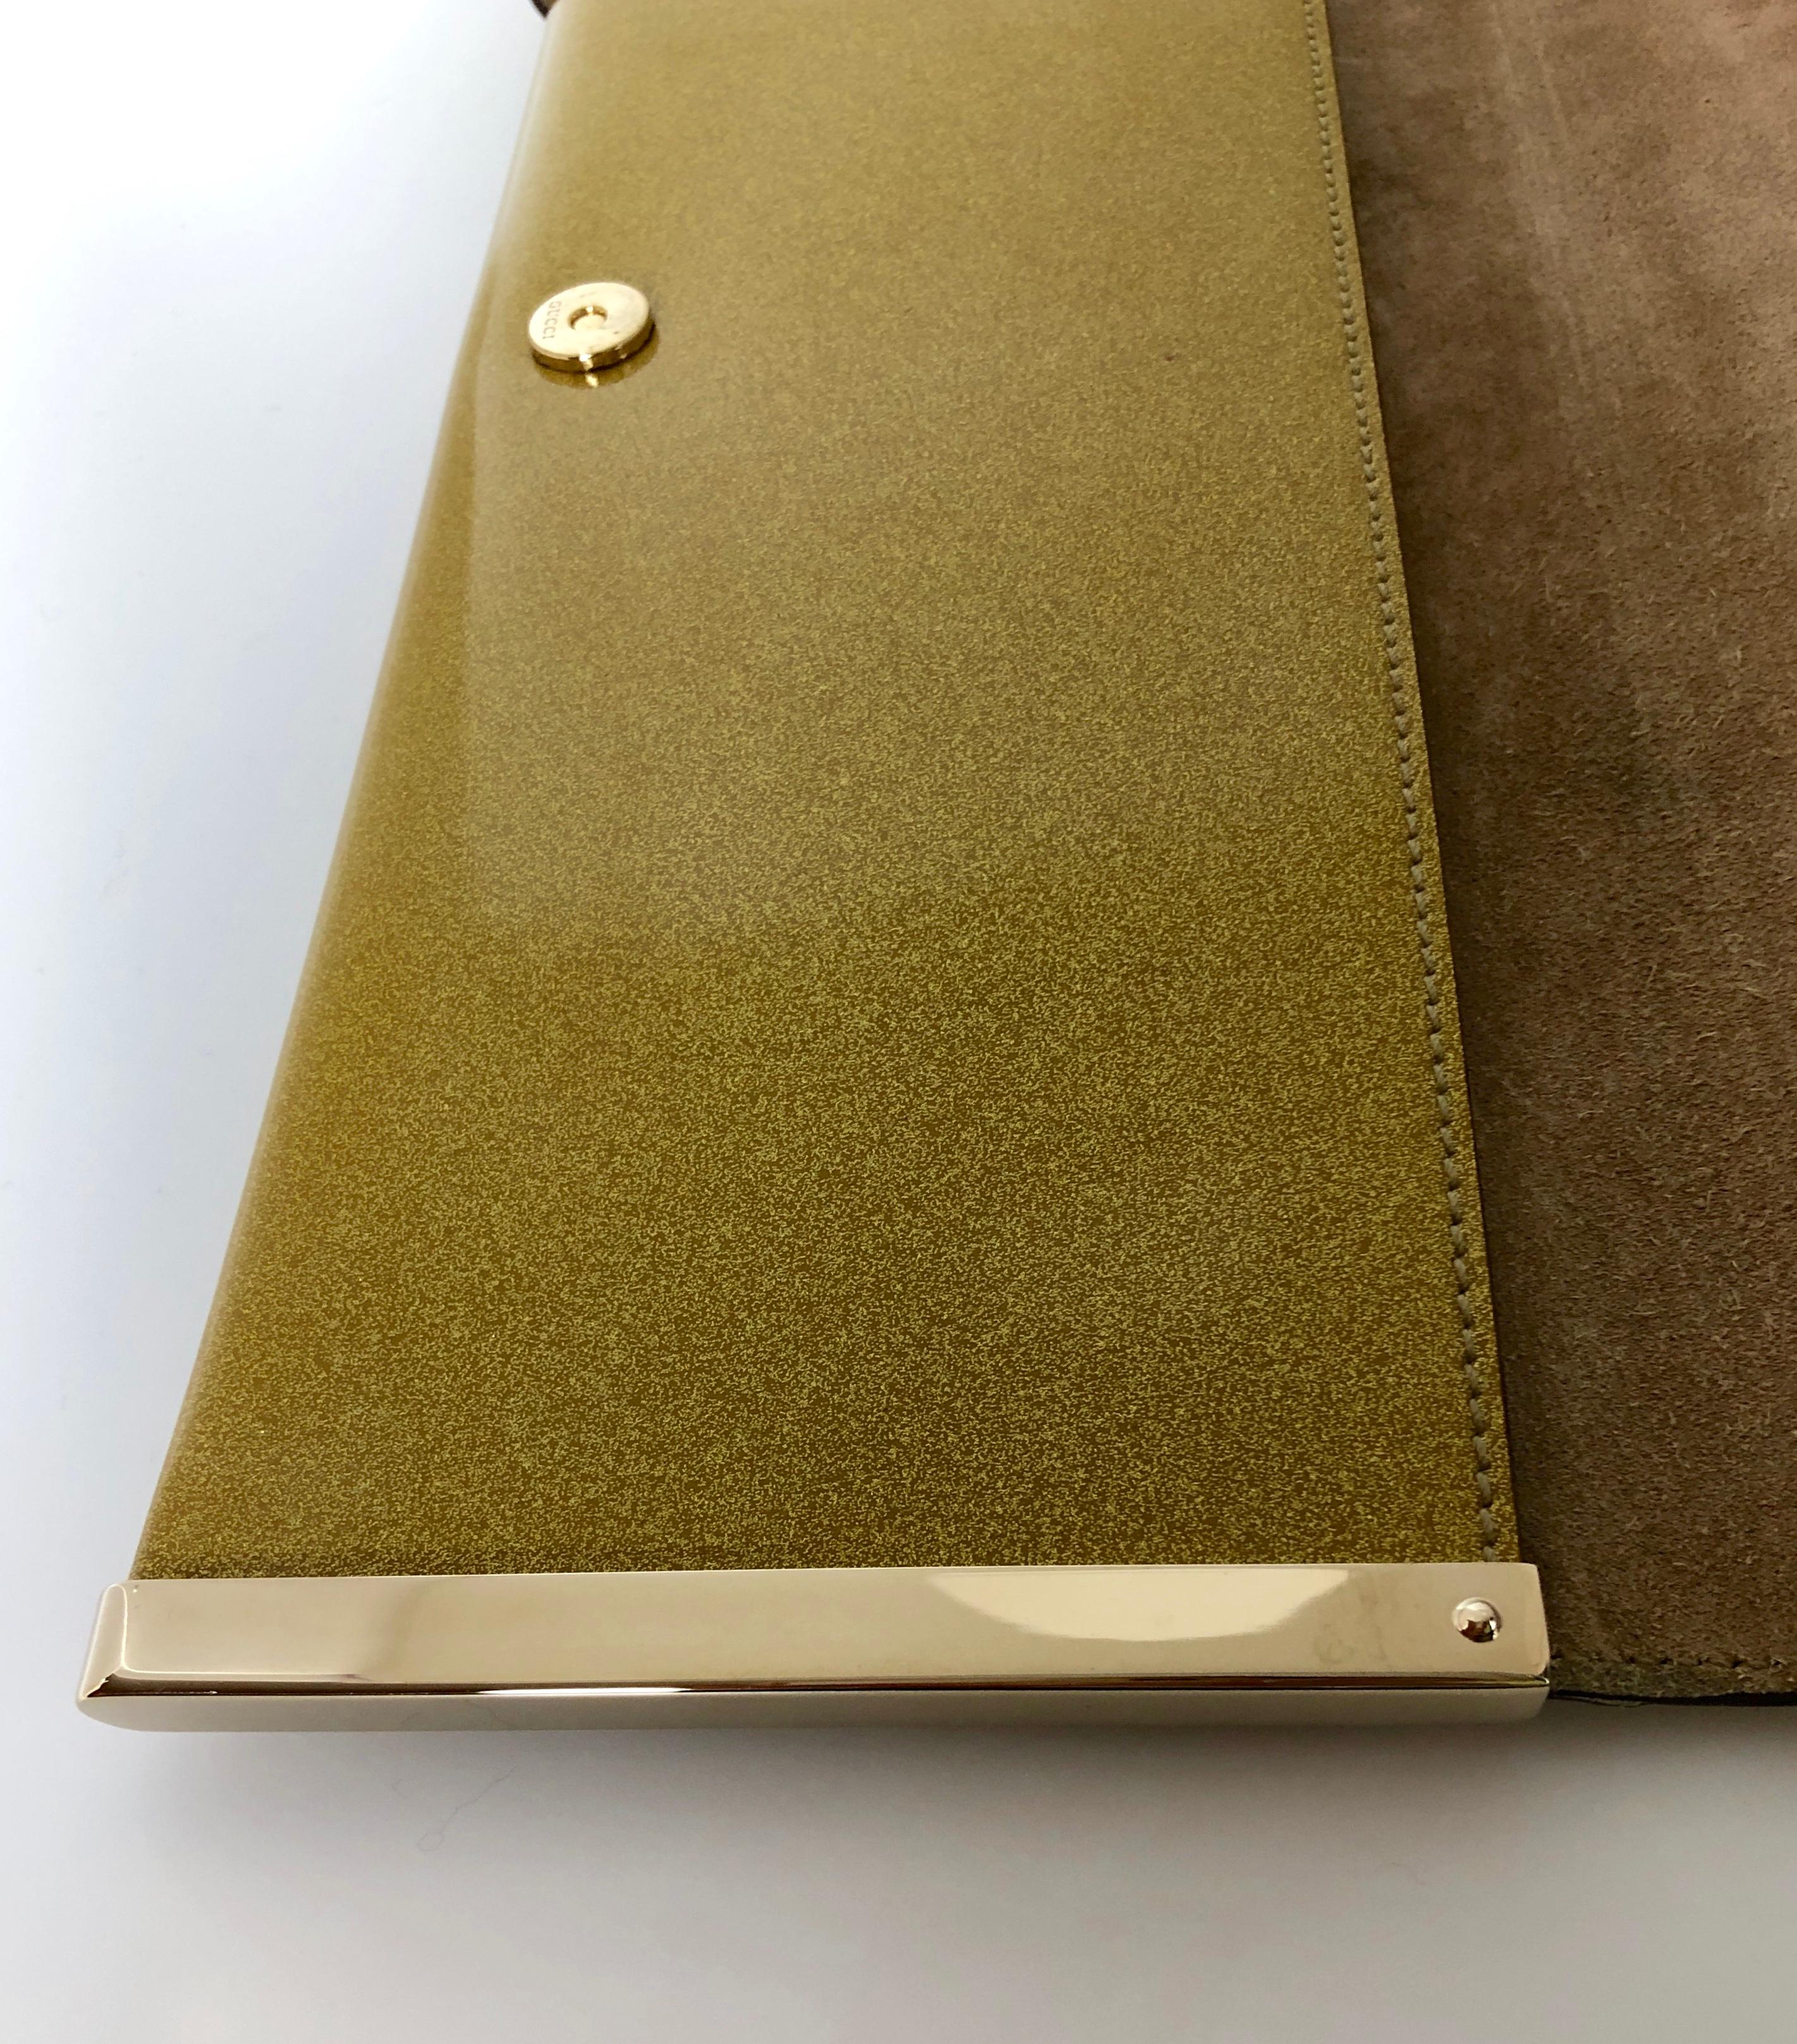 Gucci Iridescent Gold Patent Leather Elongated Clutch with Gold Metal Accents For Sale 8